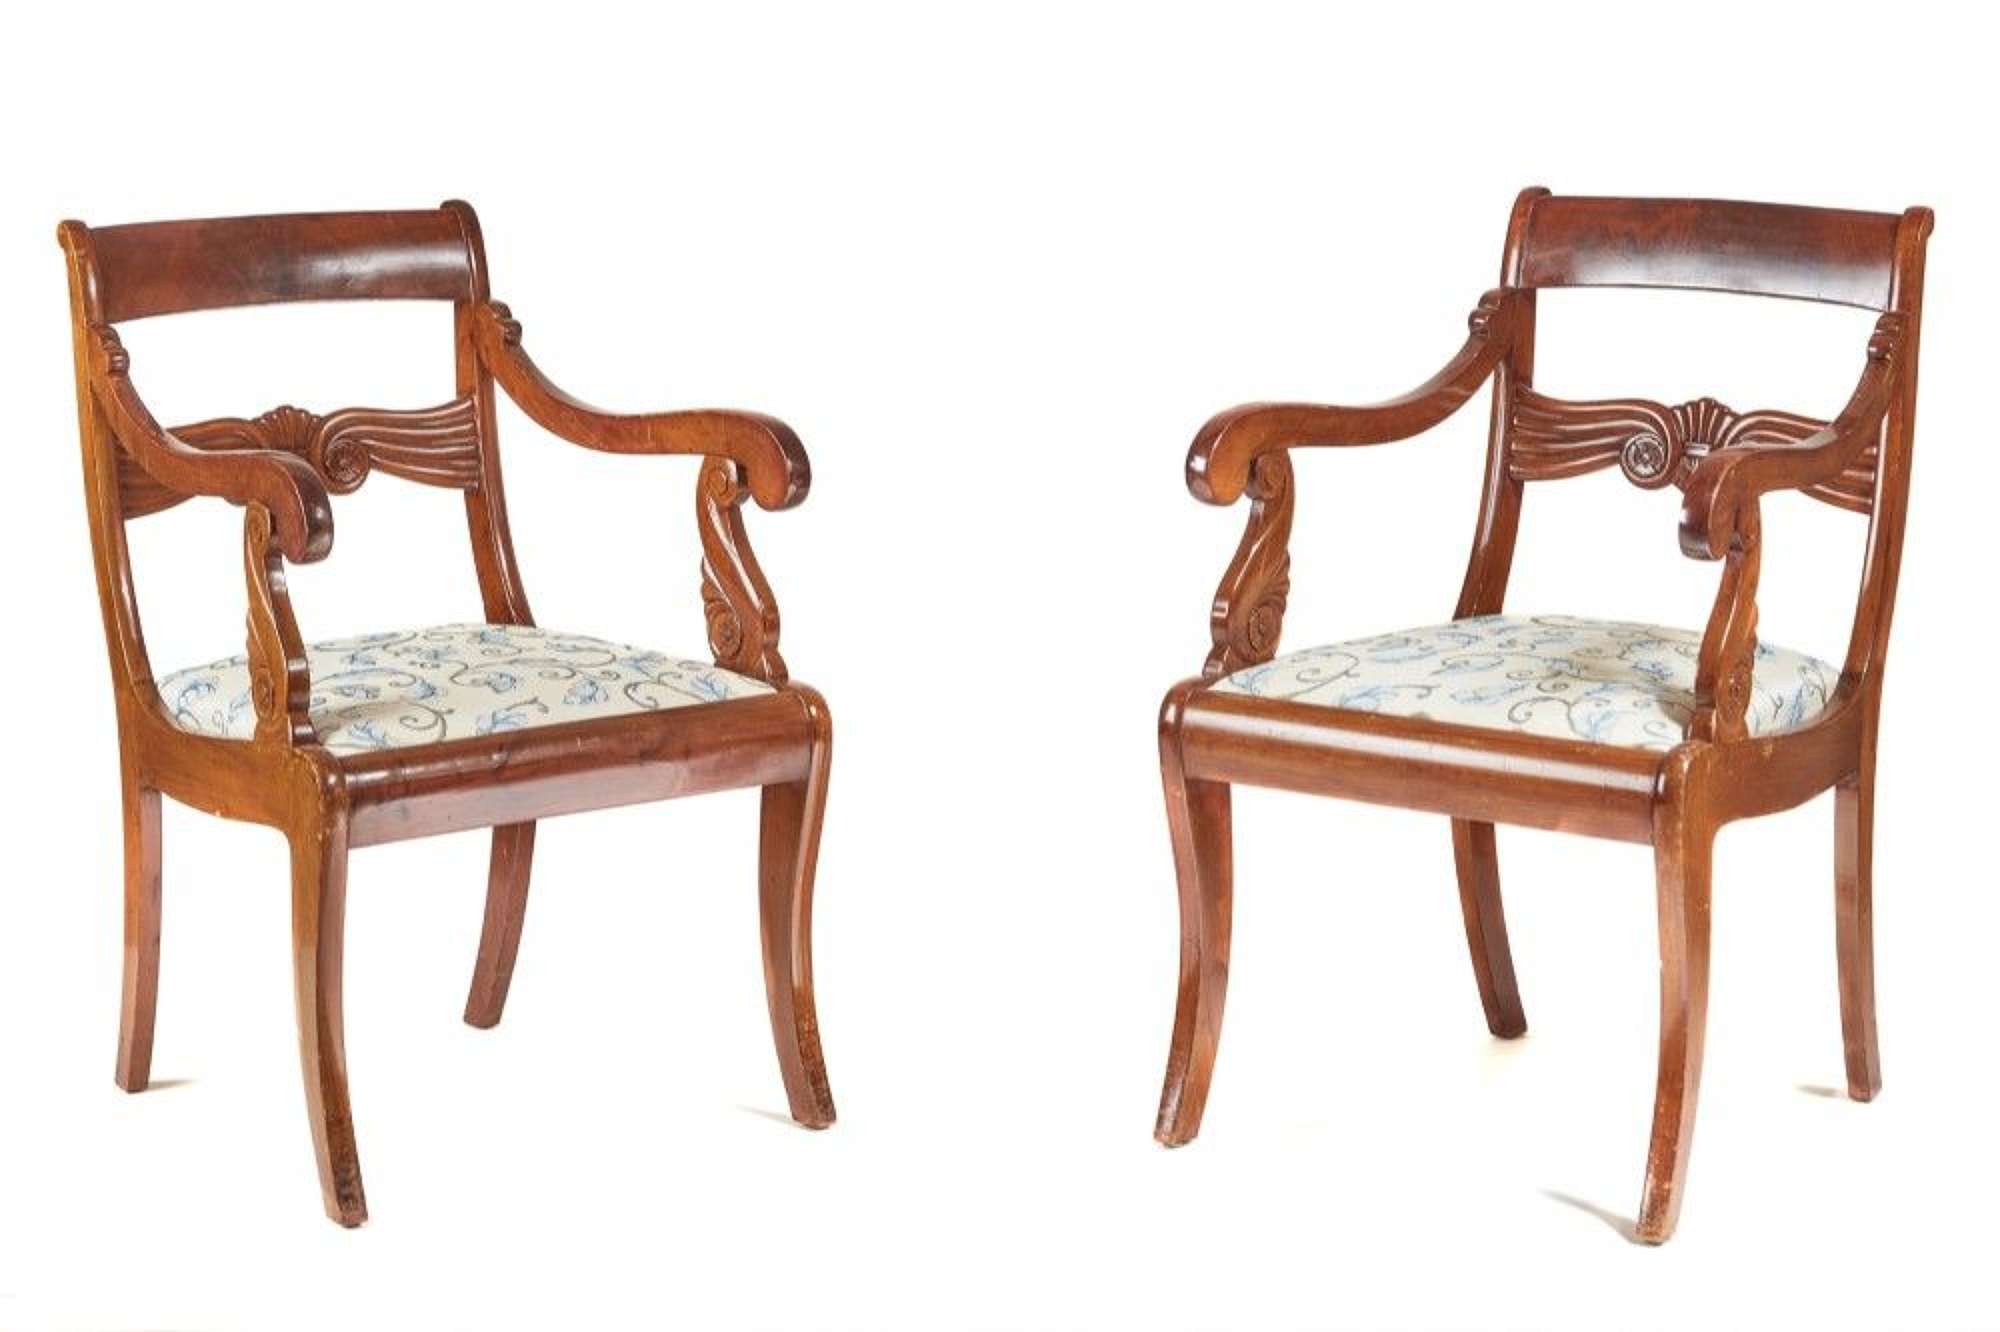 Pair Of French 19th Century Antique Mahogany Carver Chairs.